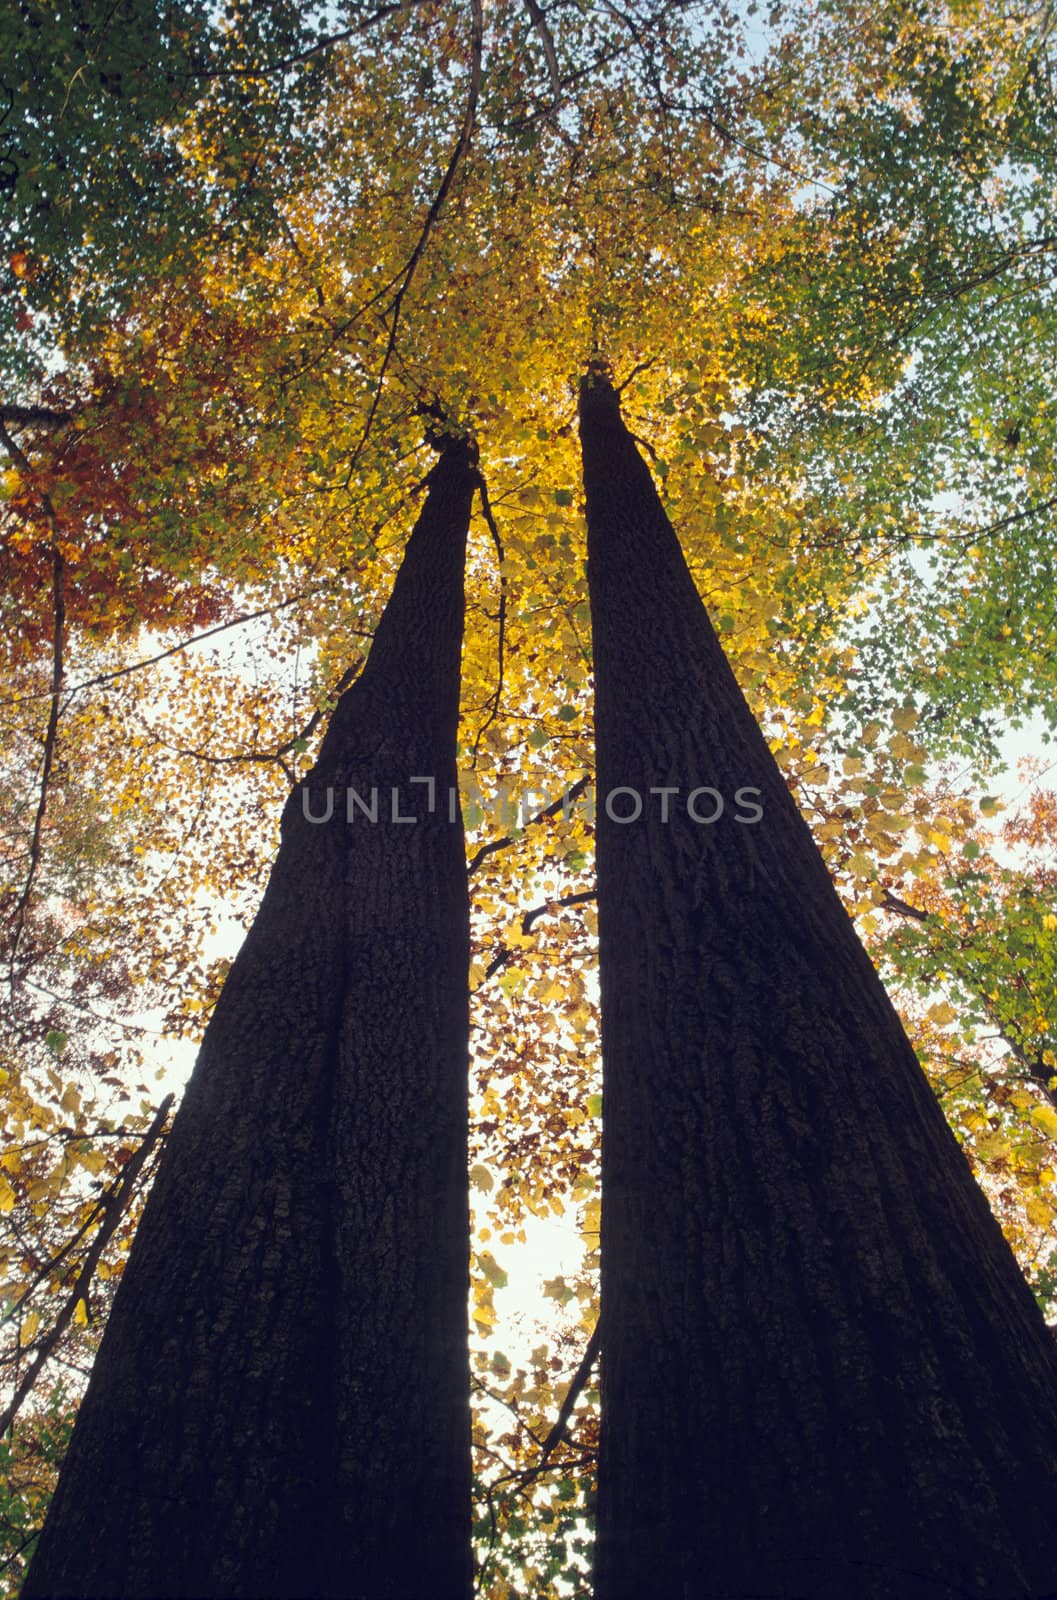 A pair of trees in fall color, taken from below looking up